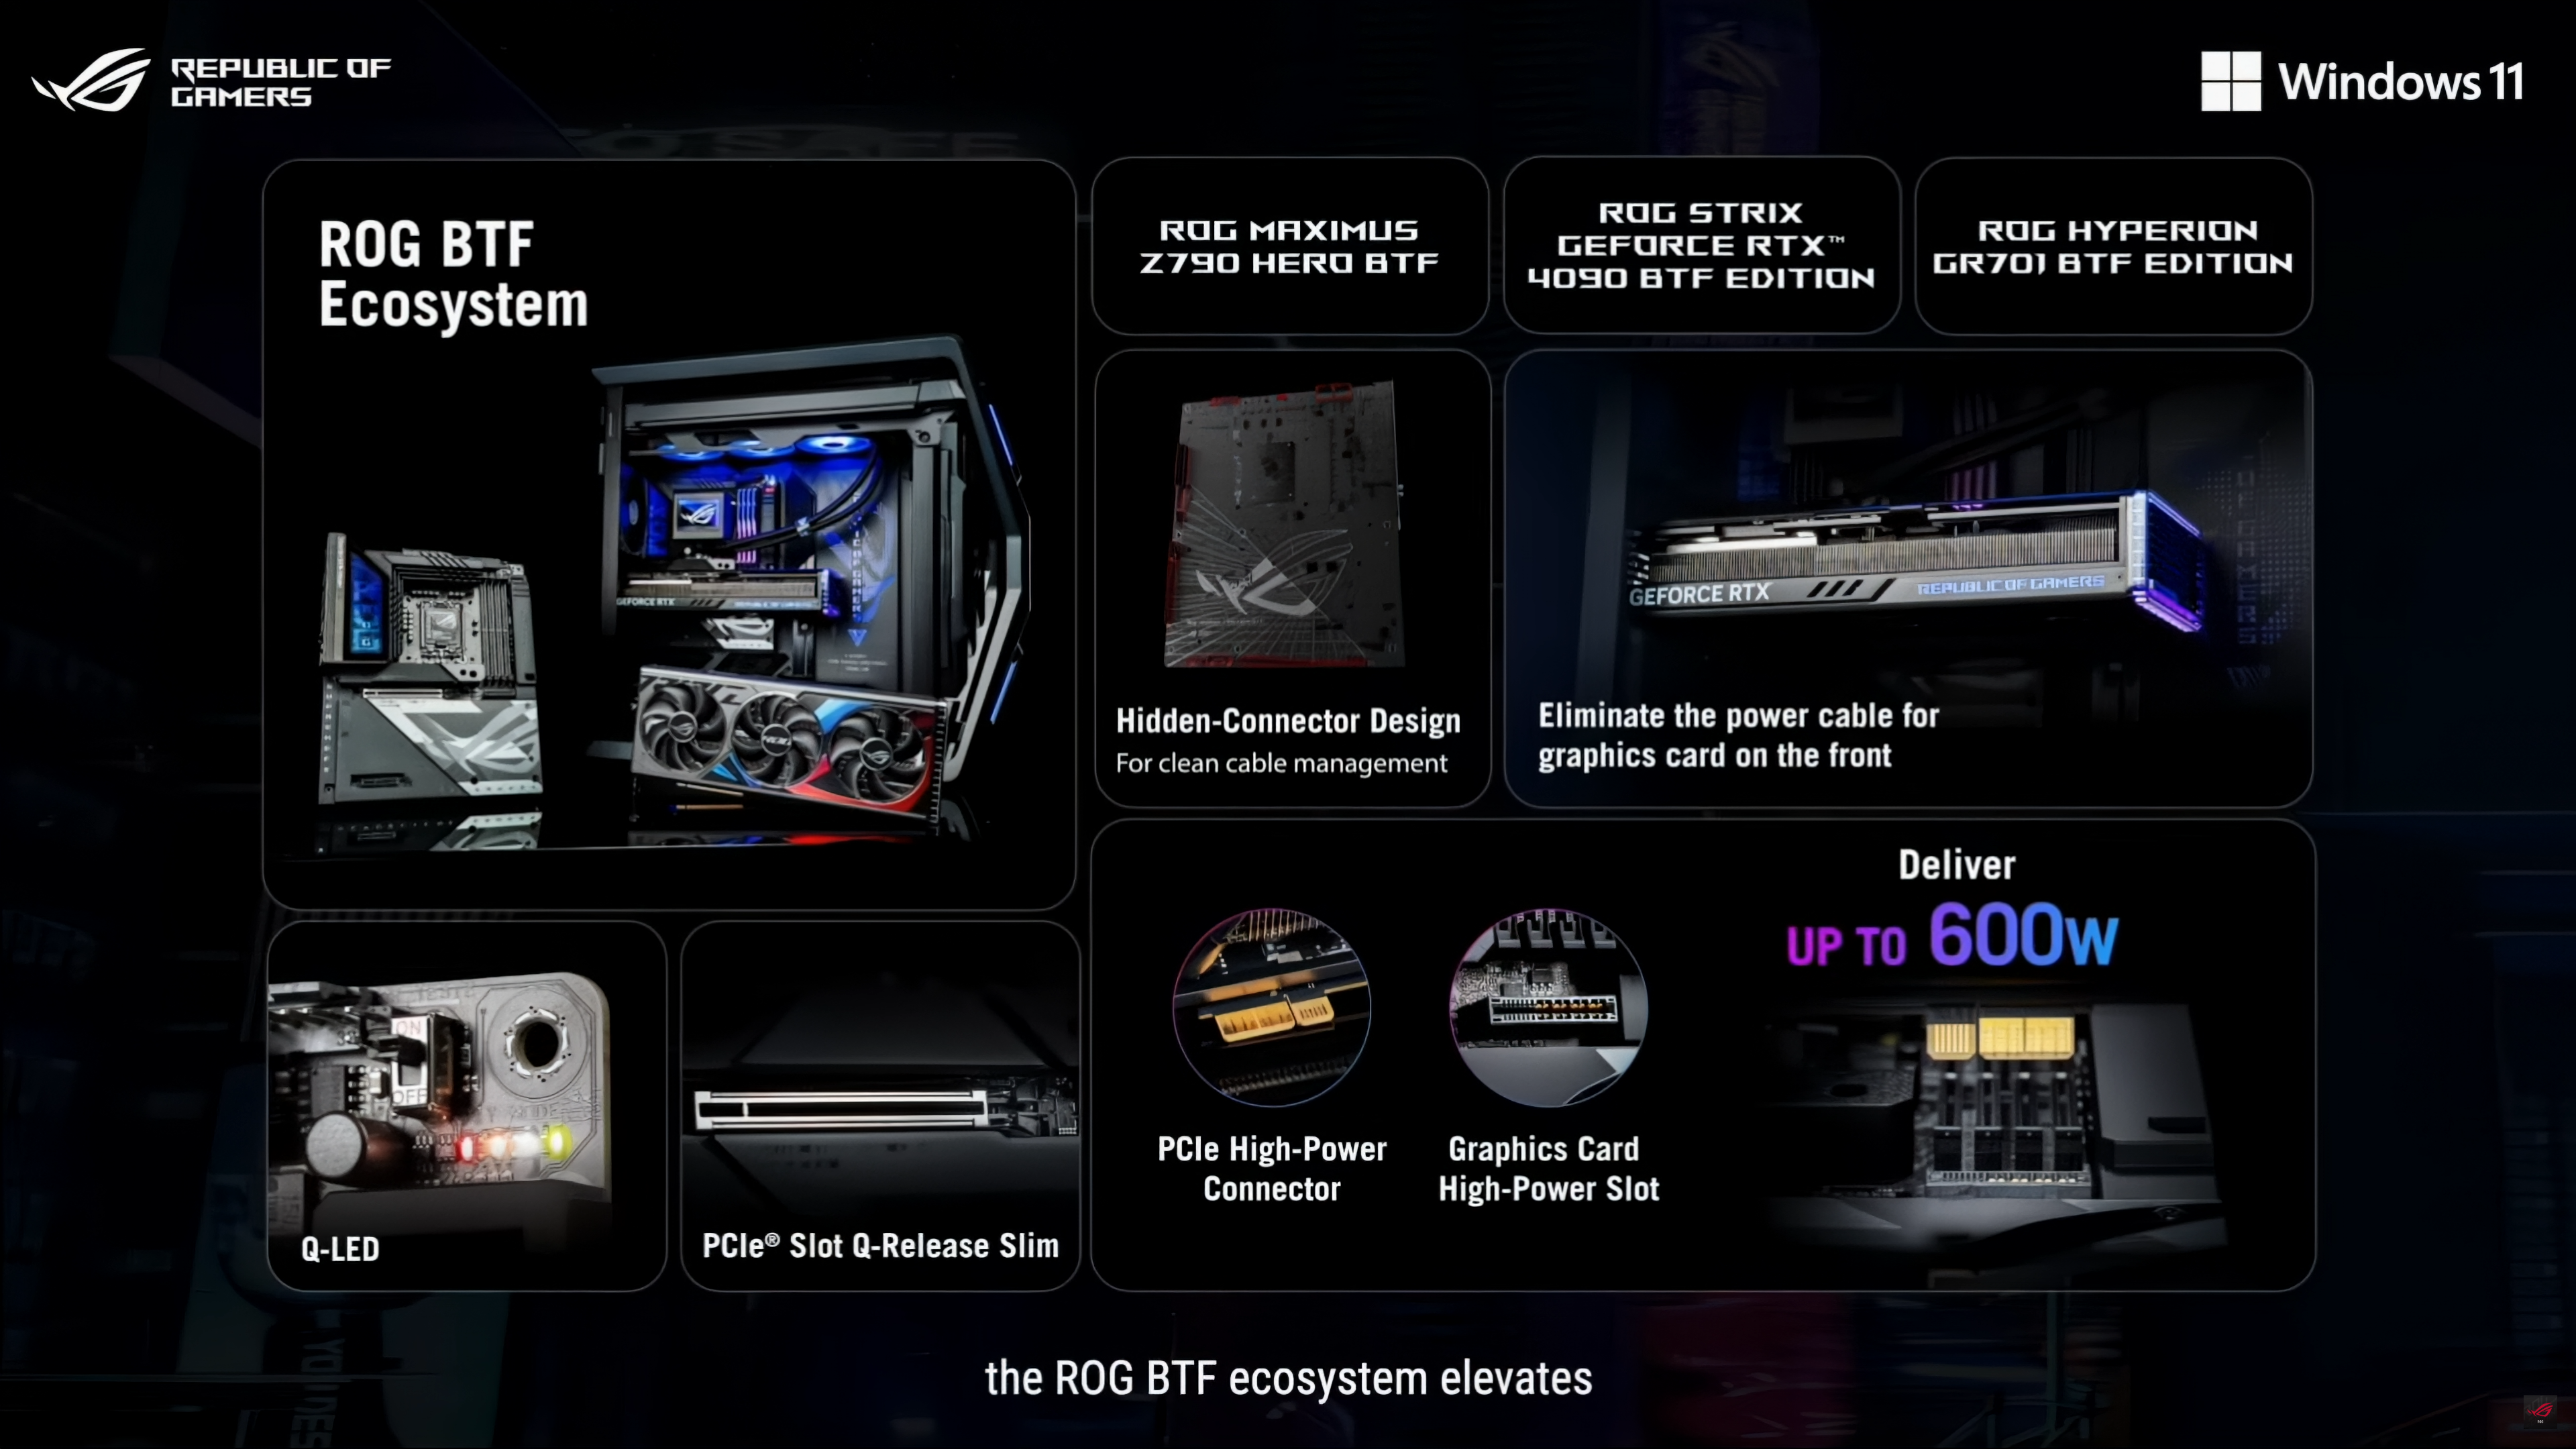 ASUS-Intros-ROG-Maximus-Z790-HERO-ROG-STRIX-RTX-4090-BTF-Edition-PC-Components-With-Hidden-Power-Connectors-_12.png